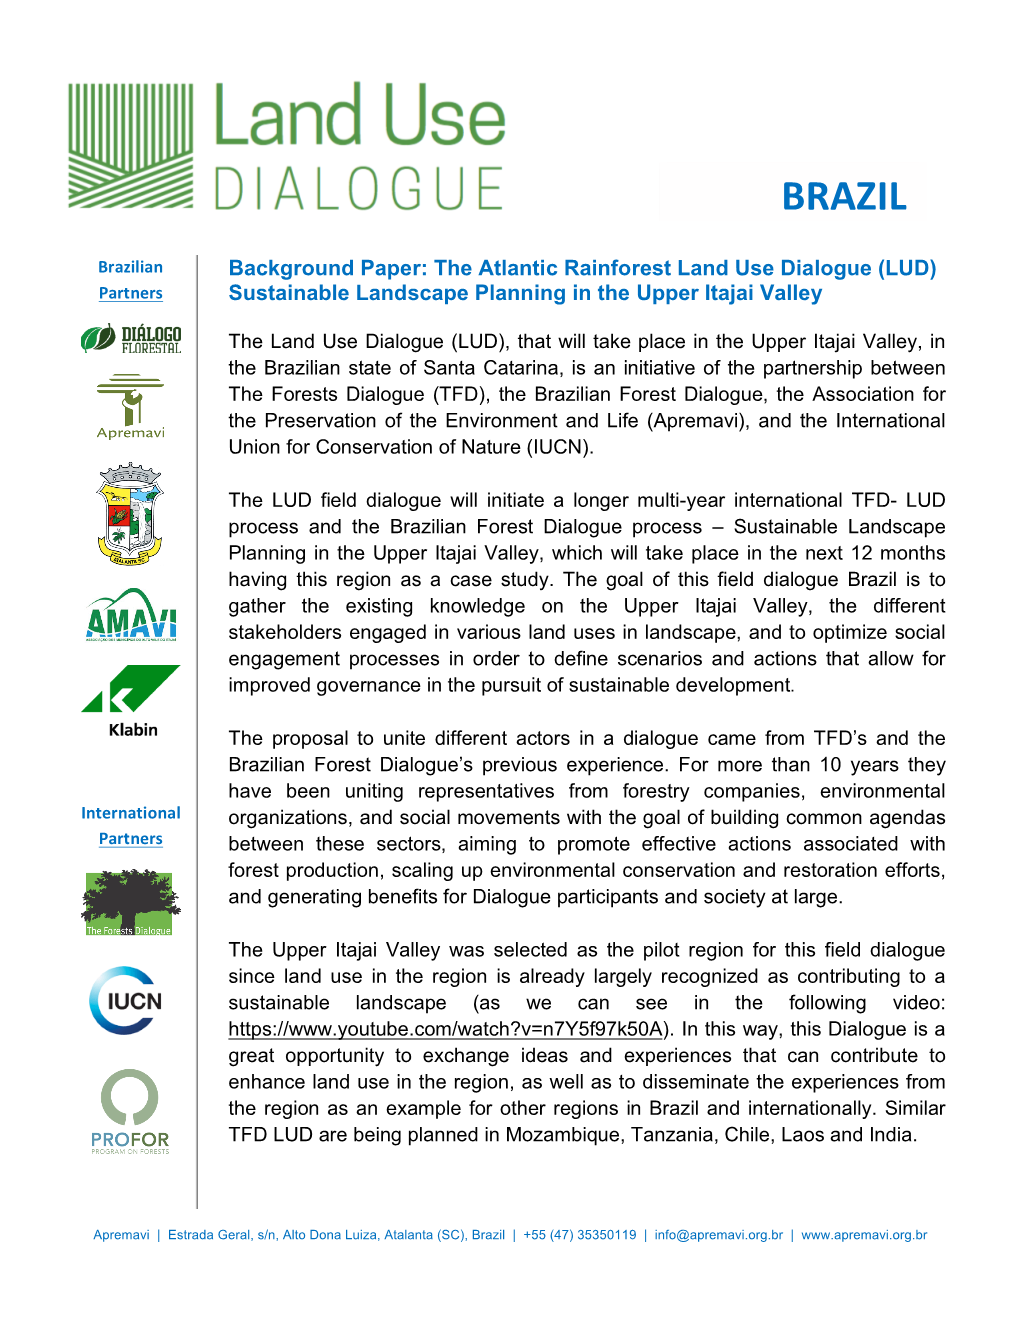 Background Paper: the Atlantic Rainforest Land Use Dialogue (LUD)